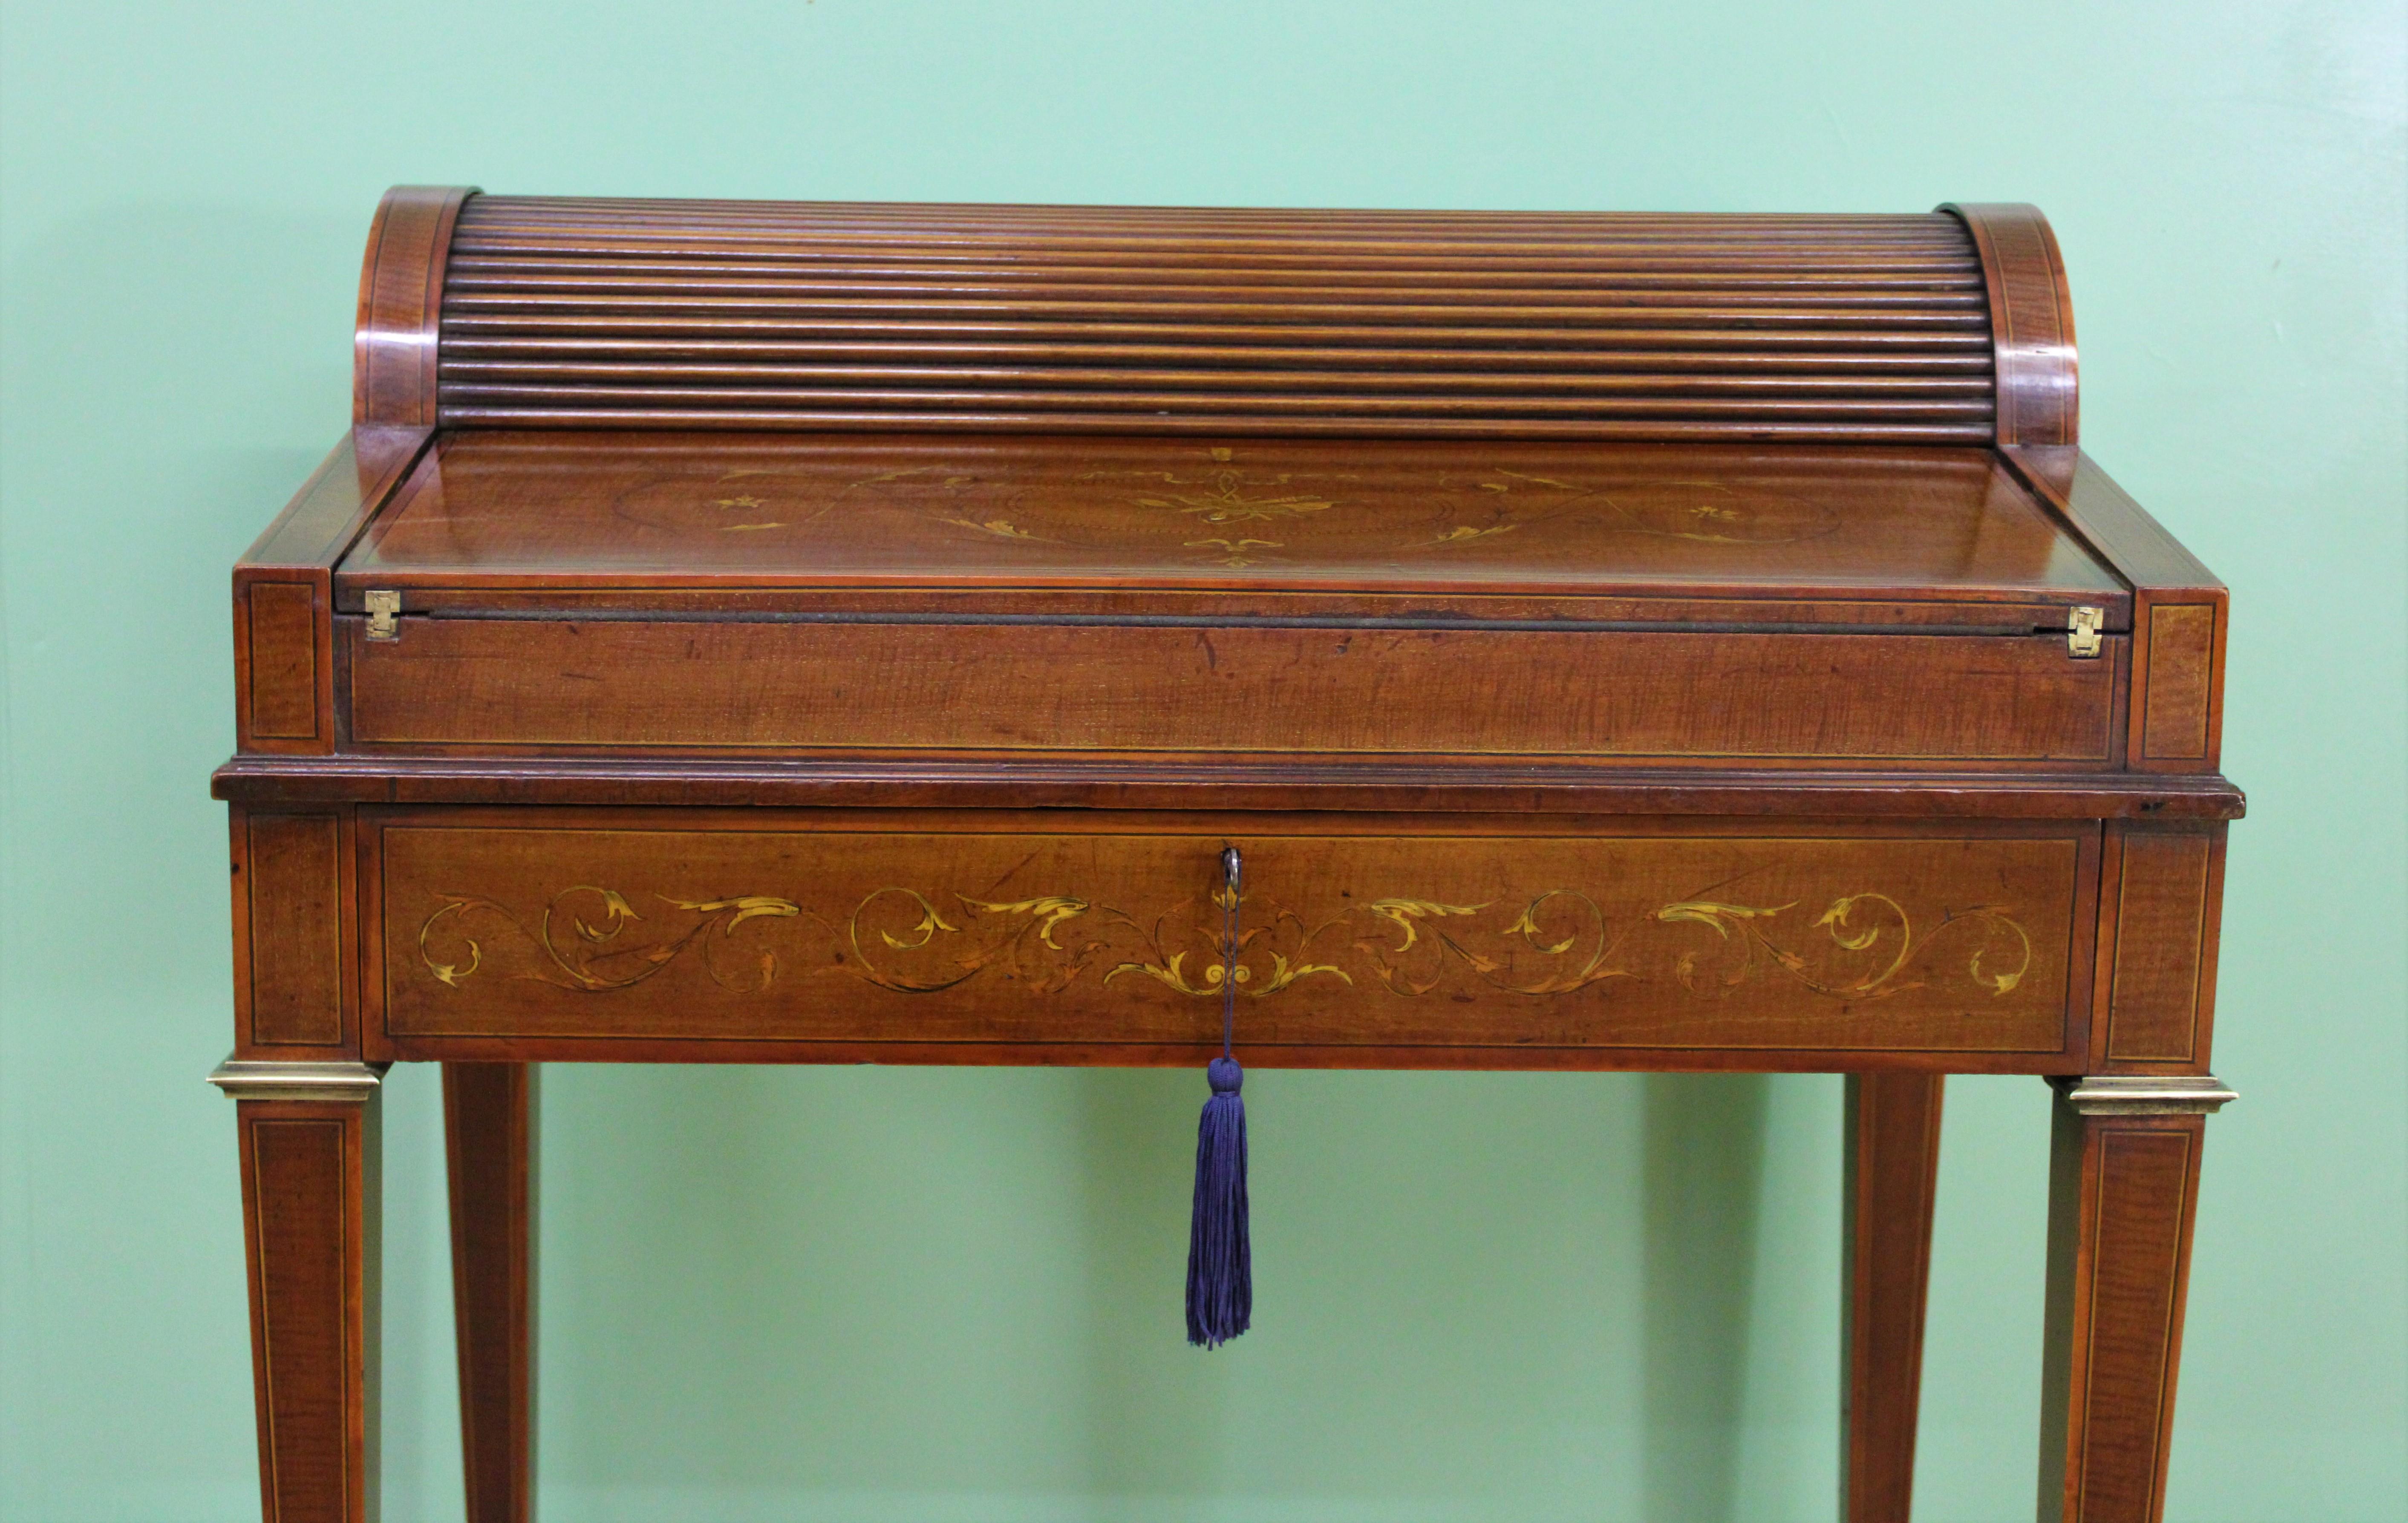 Inlay Late Victorian Inlaid Mahogany Tambour Bureau by Druce and Co. of London